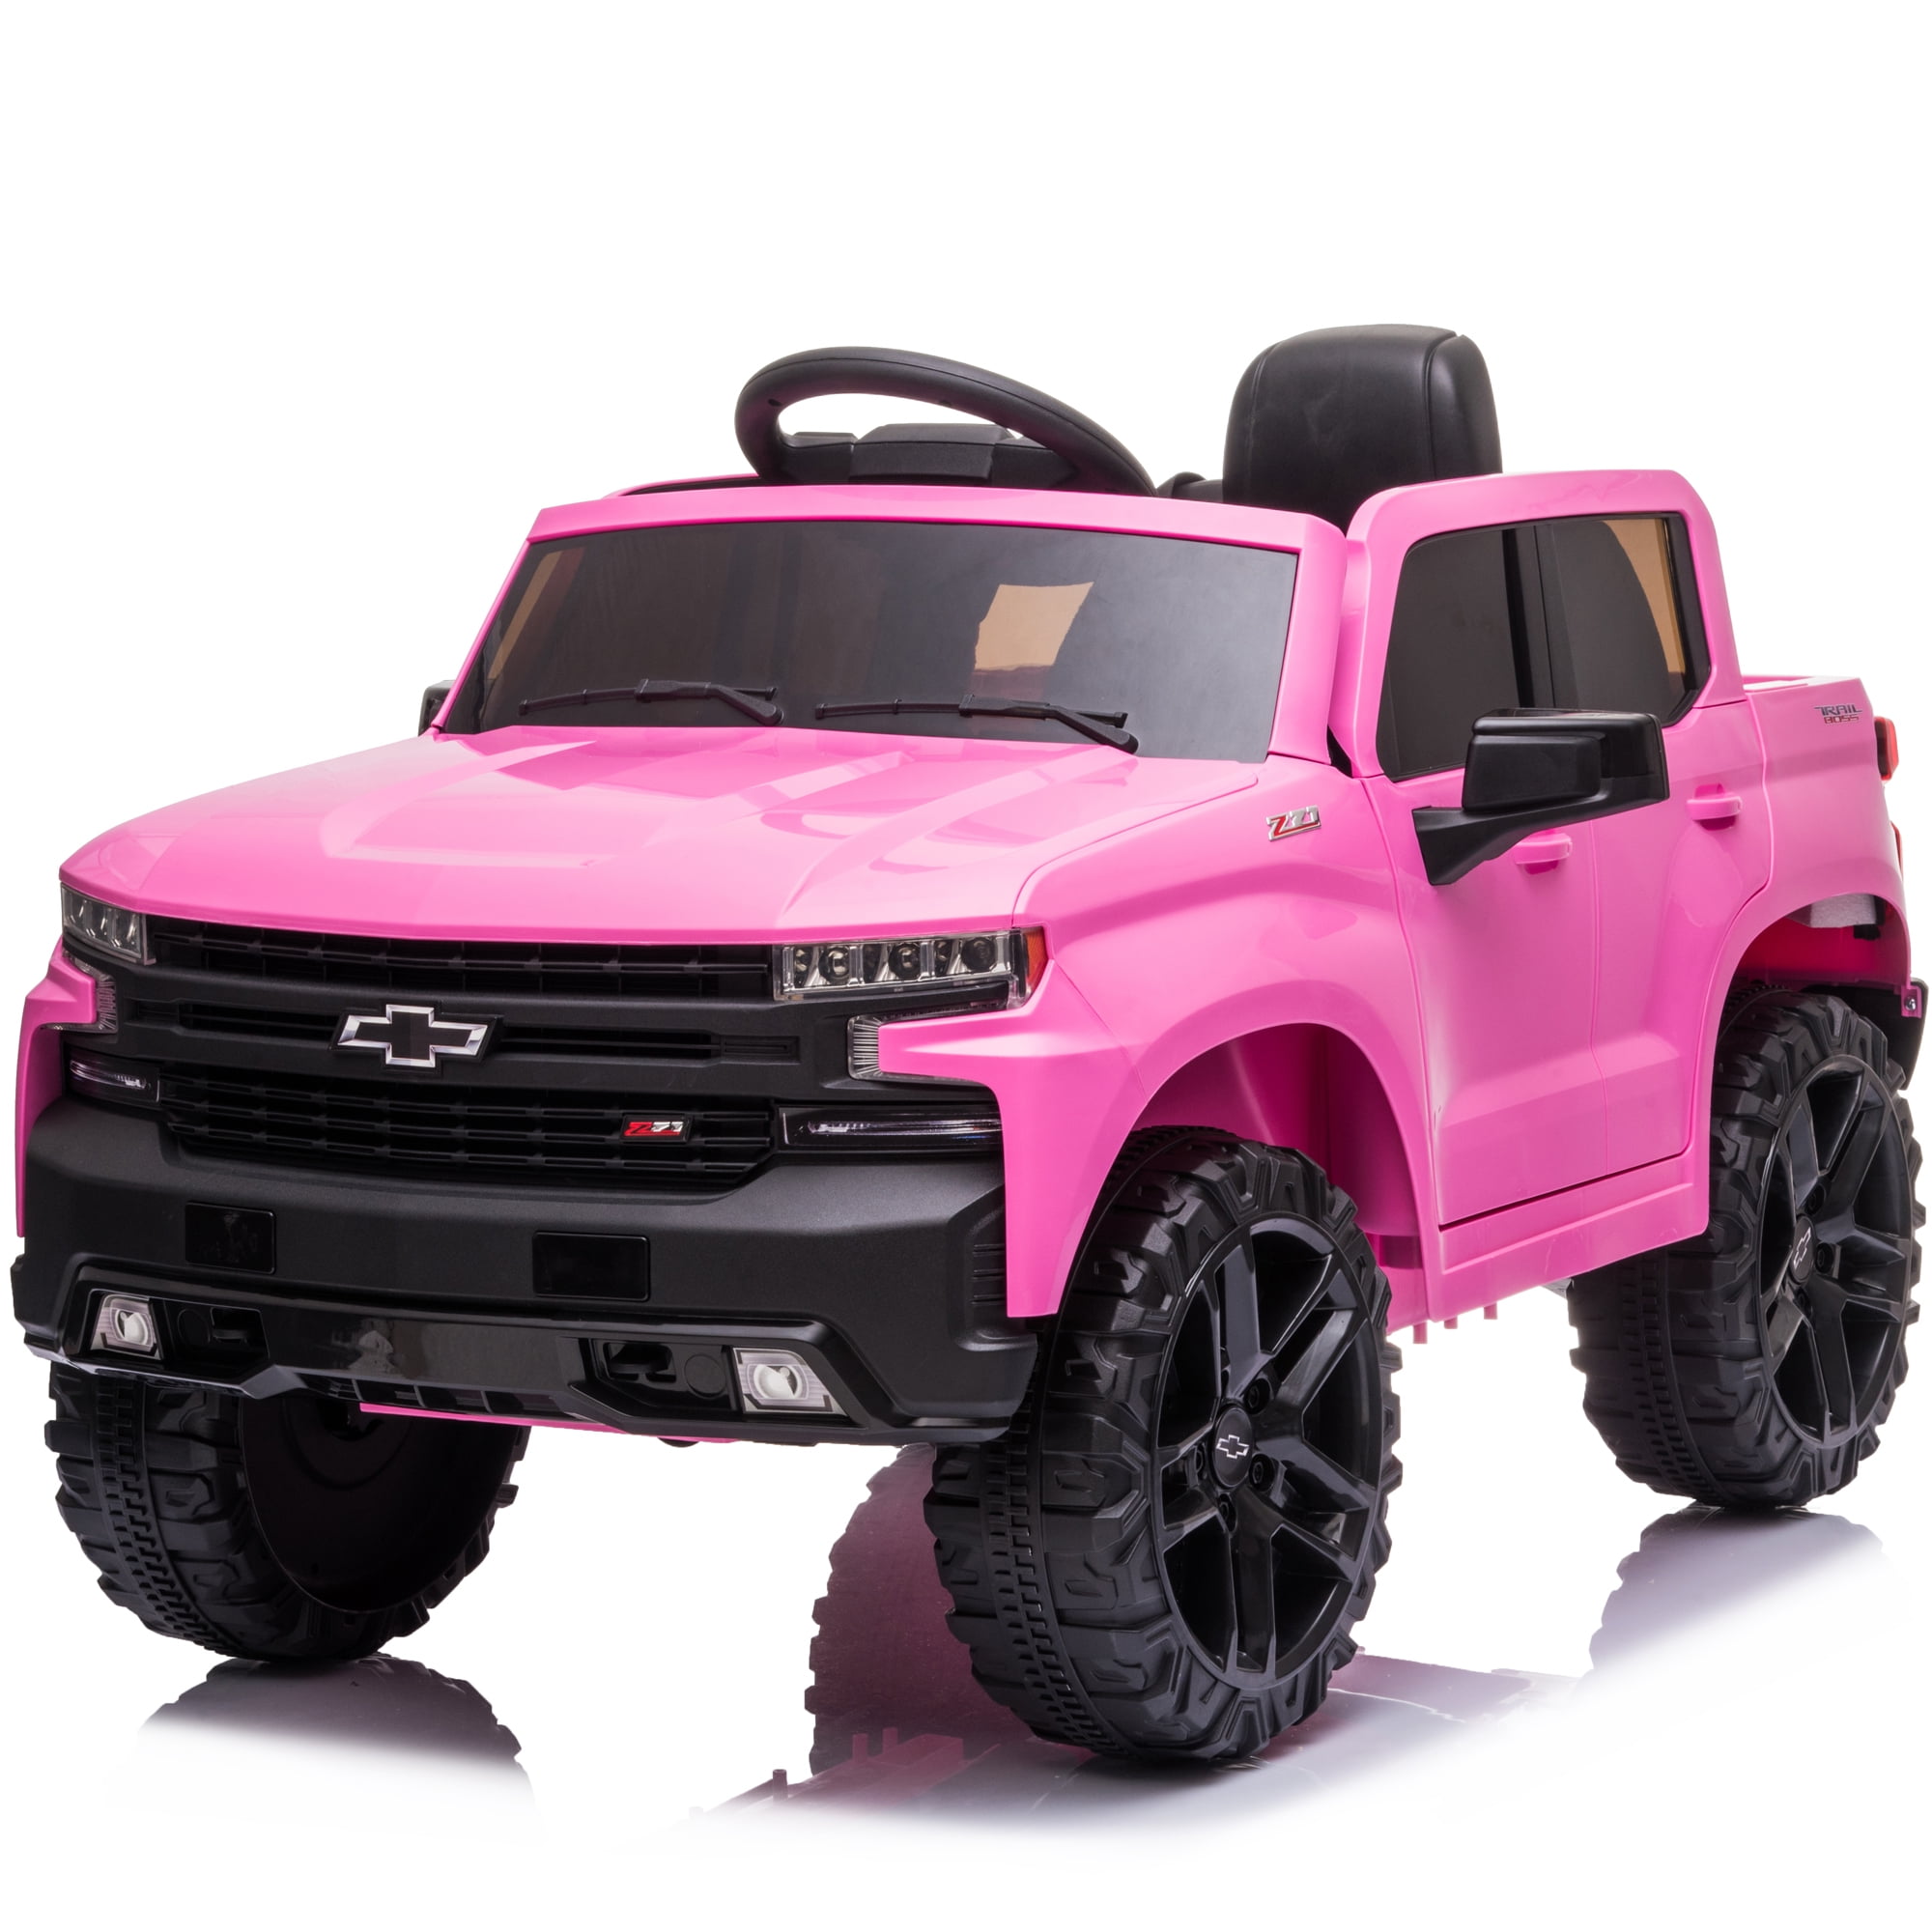 PERSONALISED Toy Car CHEVY TRUCK MODEL NAME on DOORS boy girl dad BIRTHDAY GIFT 